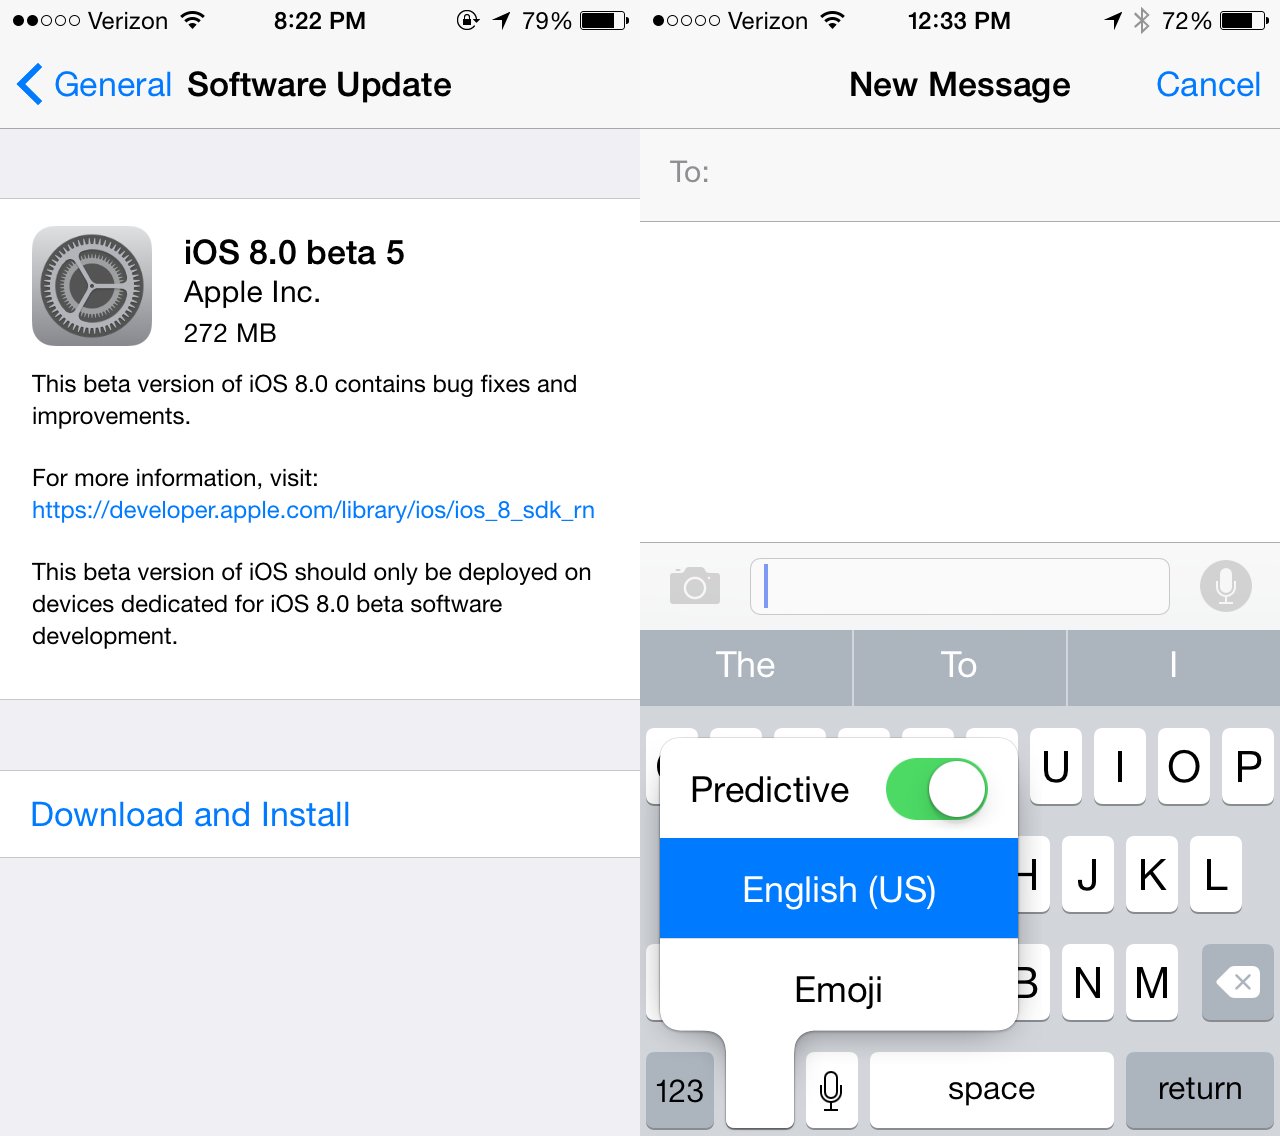 The iOS 8 beta 5 downloads reveal fine tuning of new features before the iOS 8 release date.